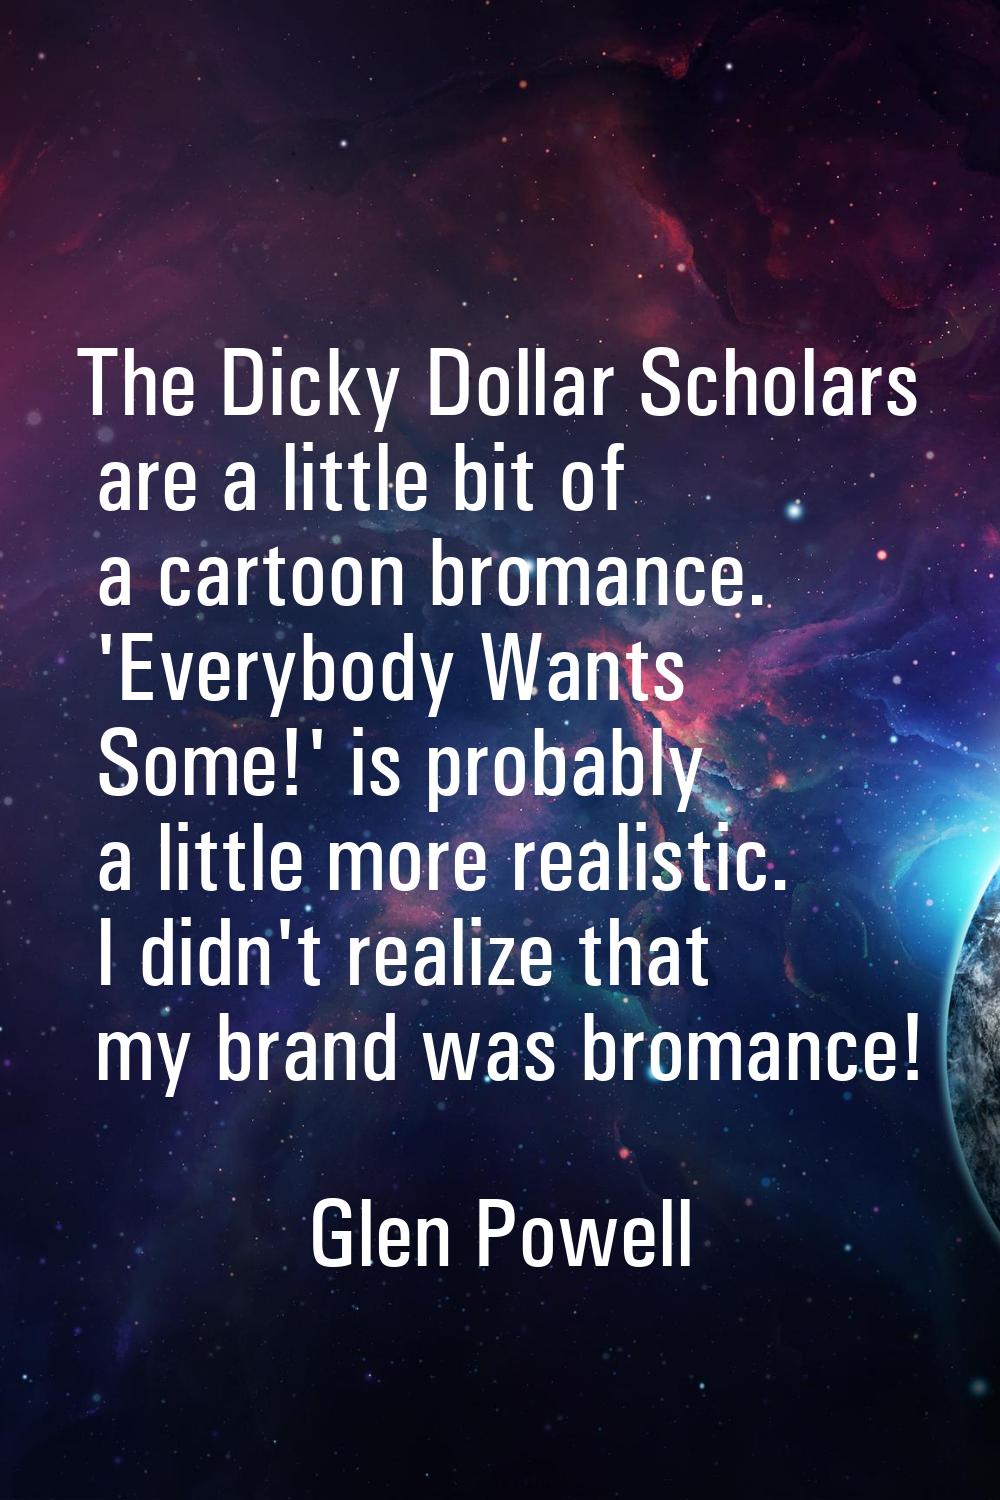 The Dicky Dollar Scholars are a little bit of a cartoon bromance. 'Everybody Wants Some!' is probab